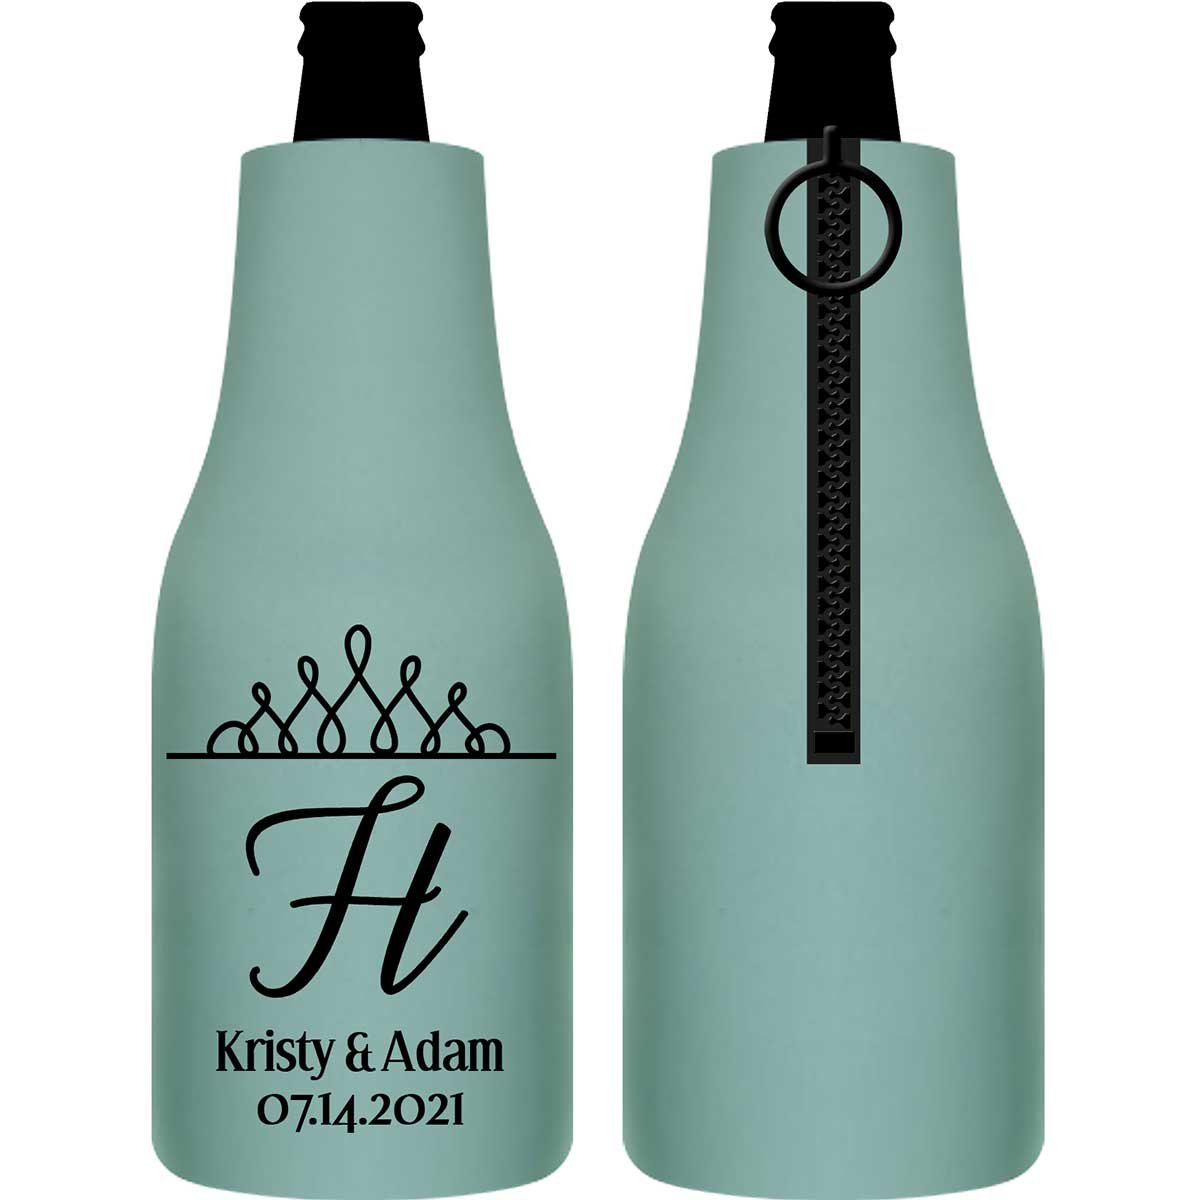 Classic Wedding Design 4A Foldable Zippered Bottle Koozies Wedding Gifts for Guests